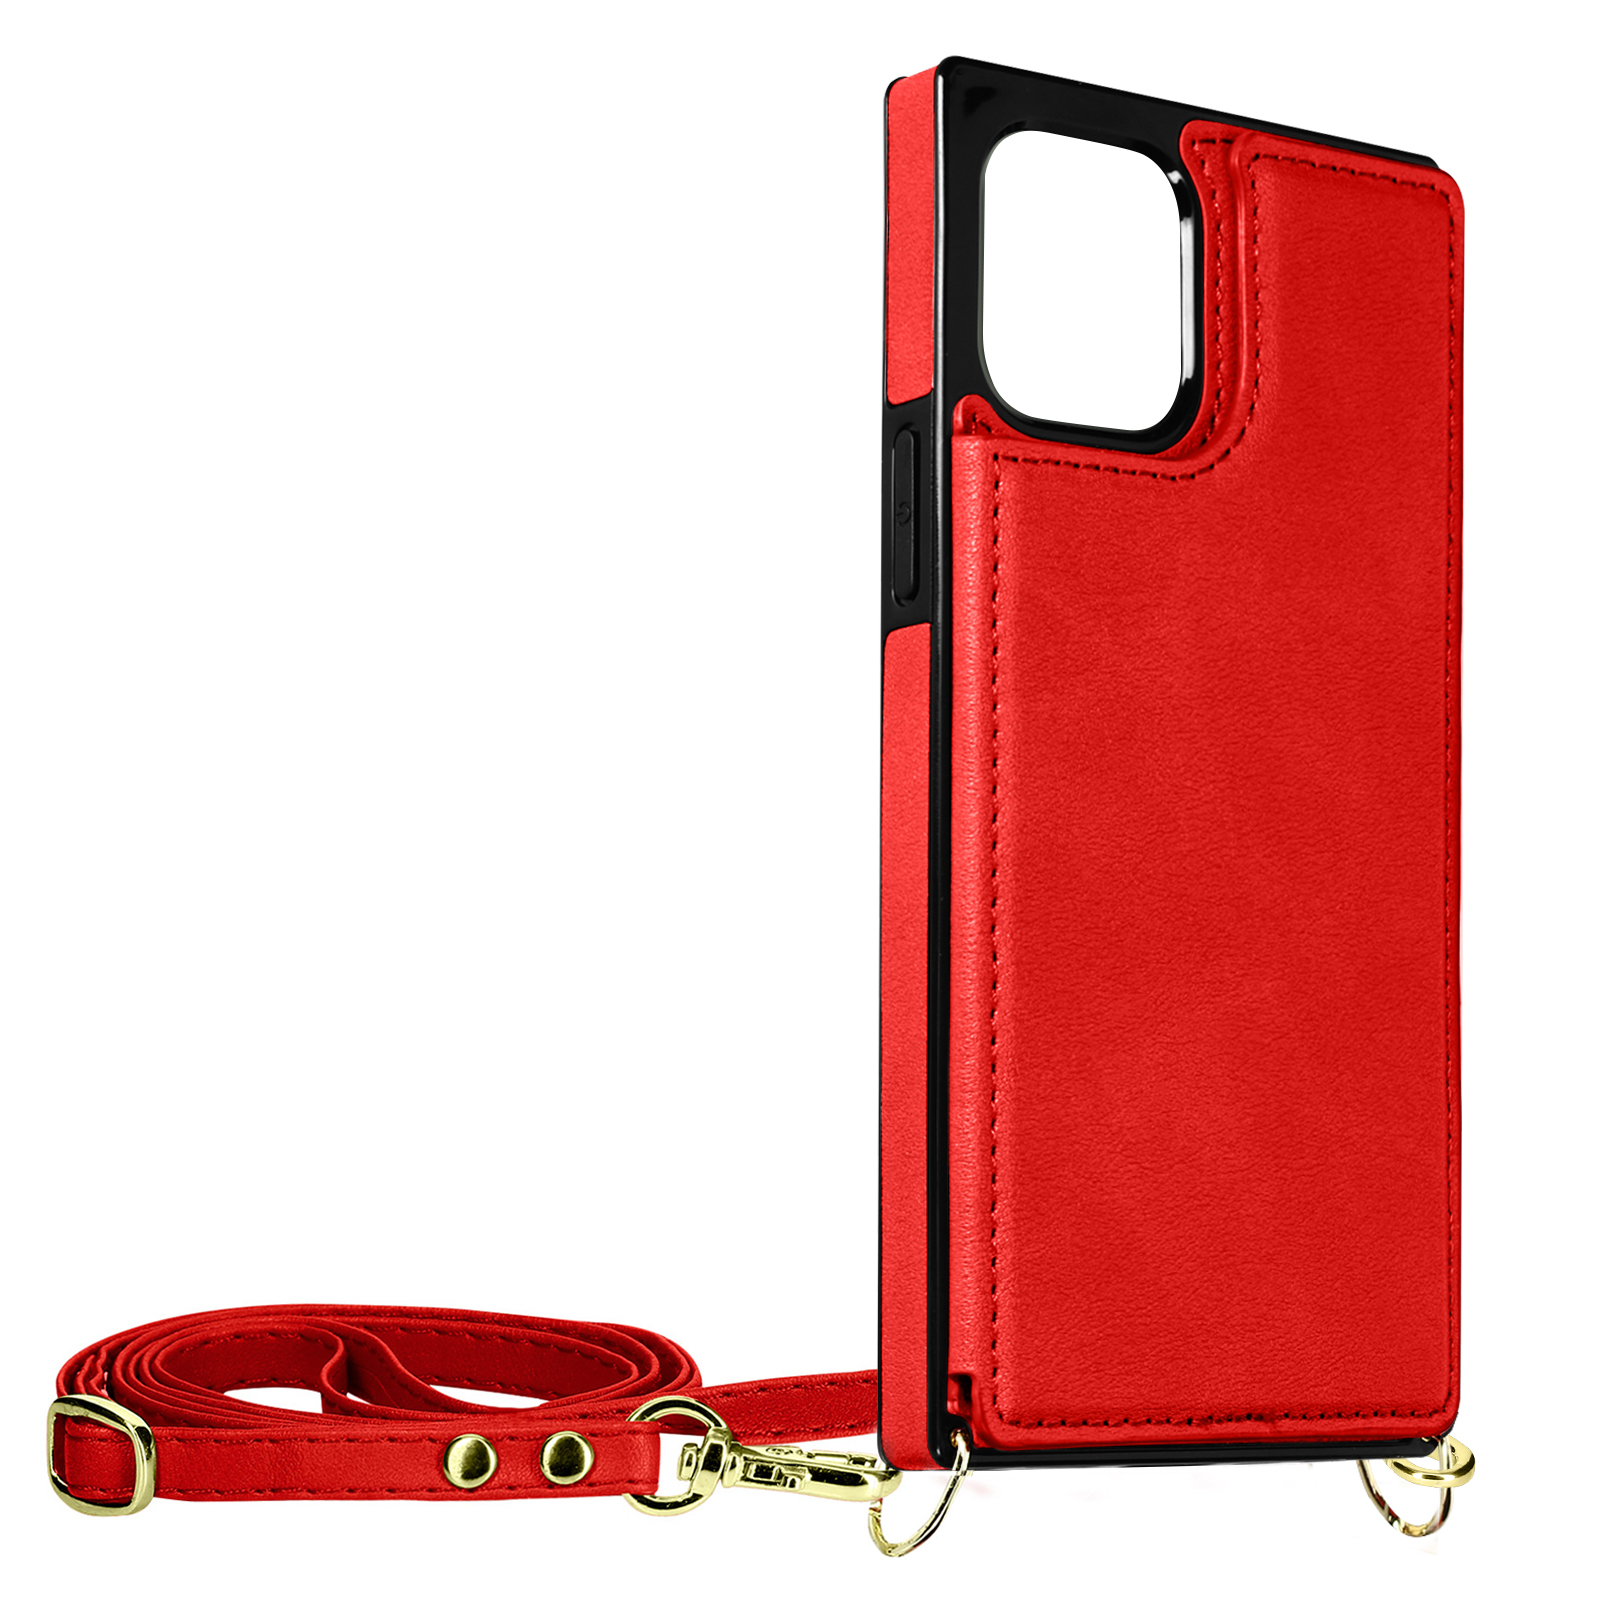 iPhone Max, Darling Pro Rot Series, AVIZAR Backcover, 11 Apple,